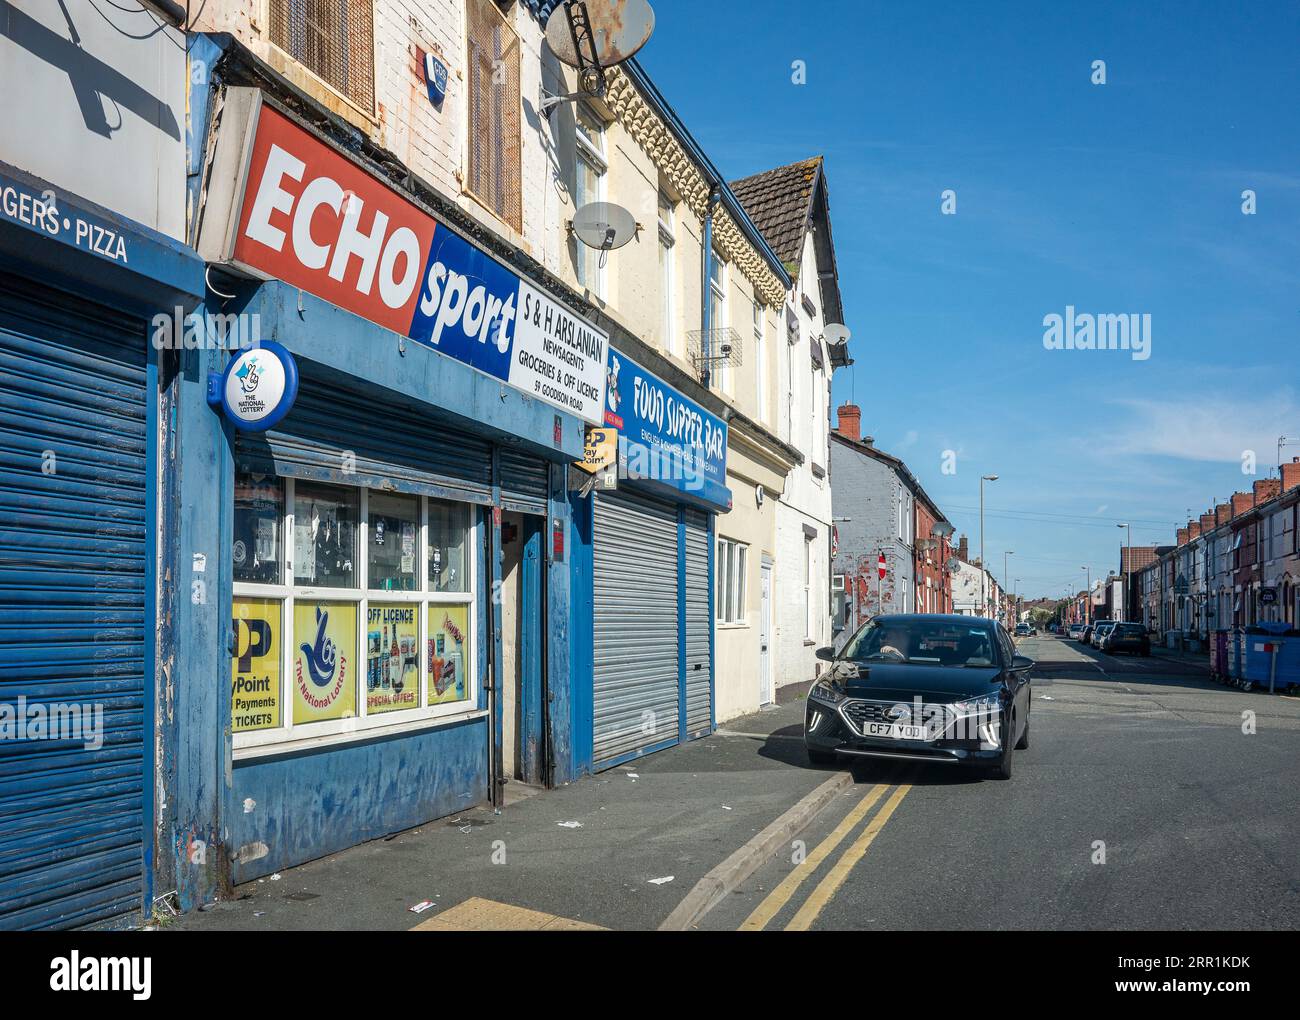 Goodison Road and Residential area outside Goodison Park on a quiet Sunday in Liverpool, UK Stock Photo